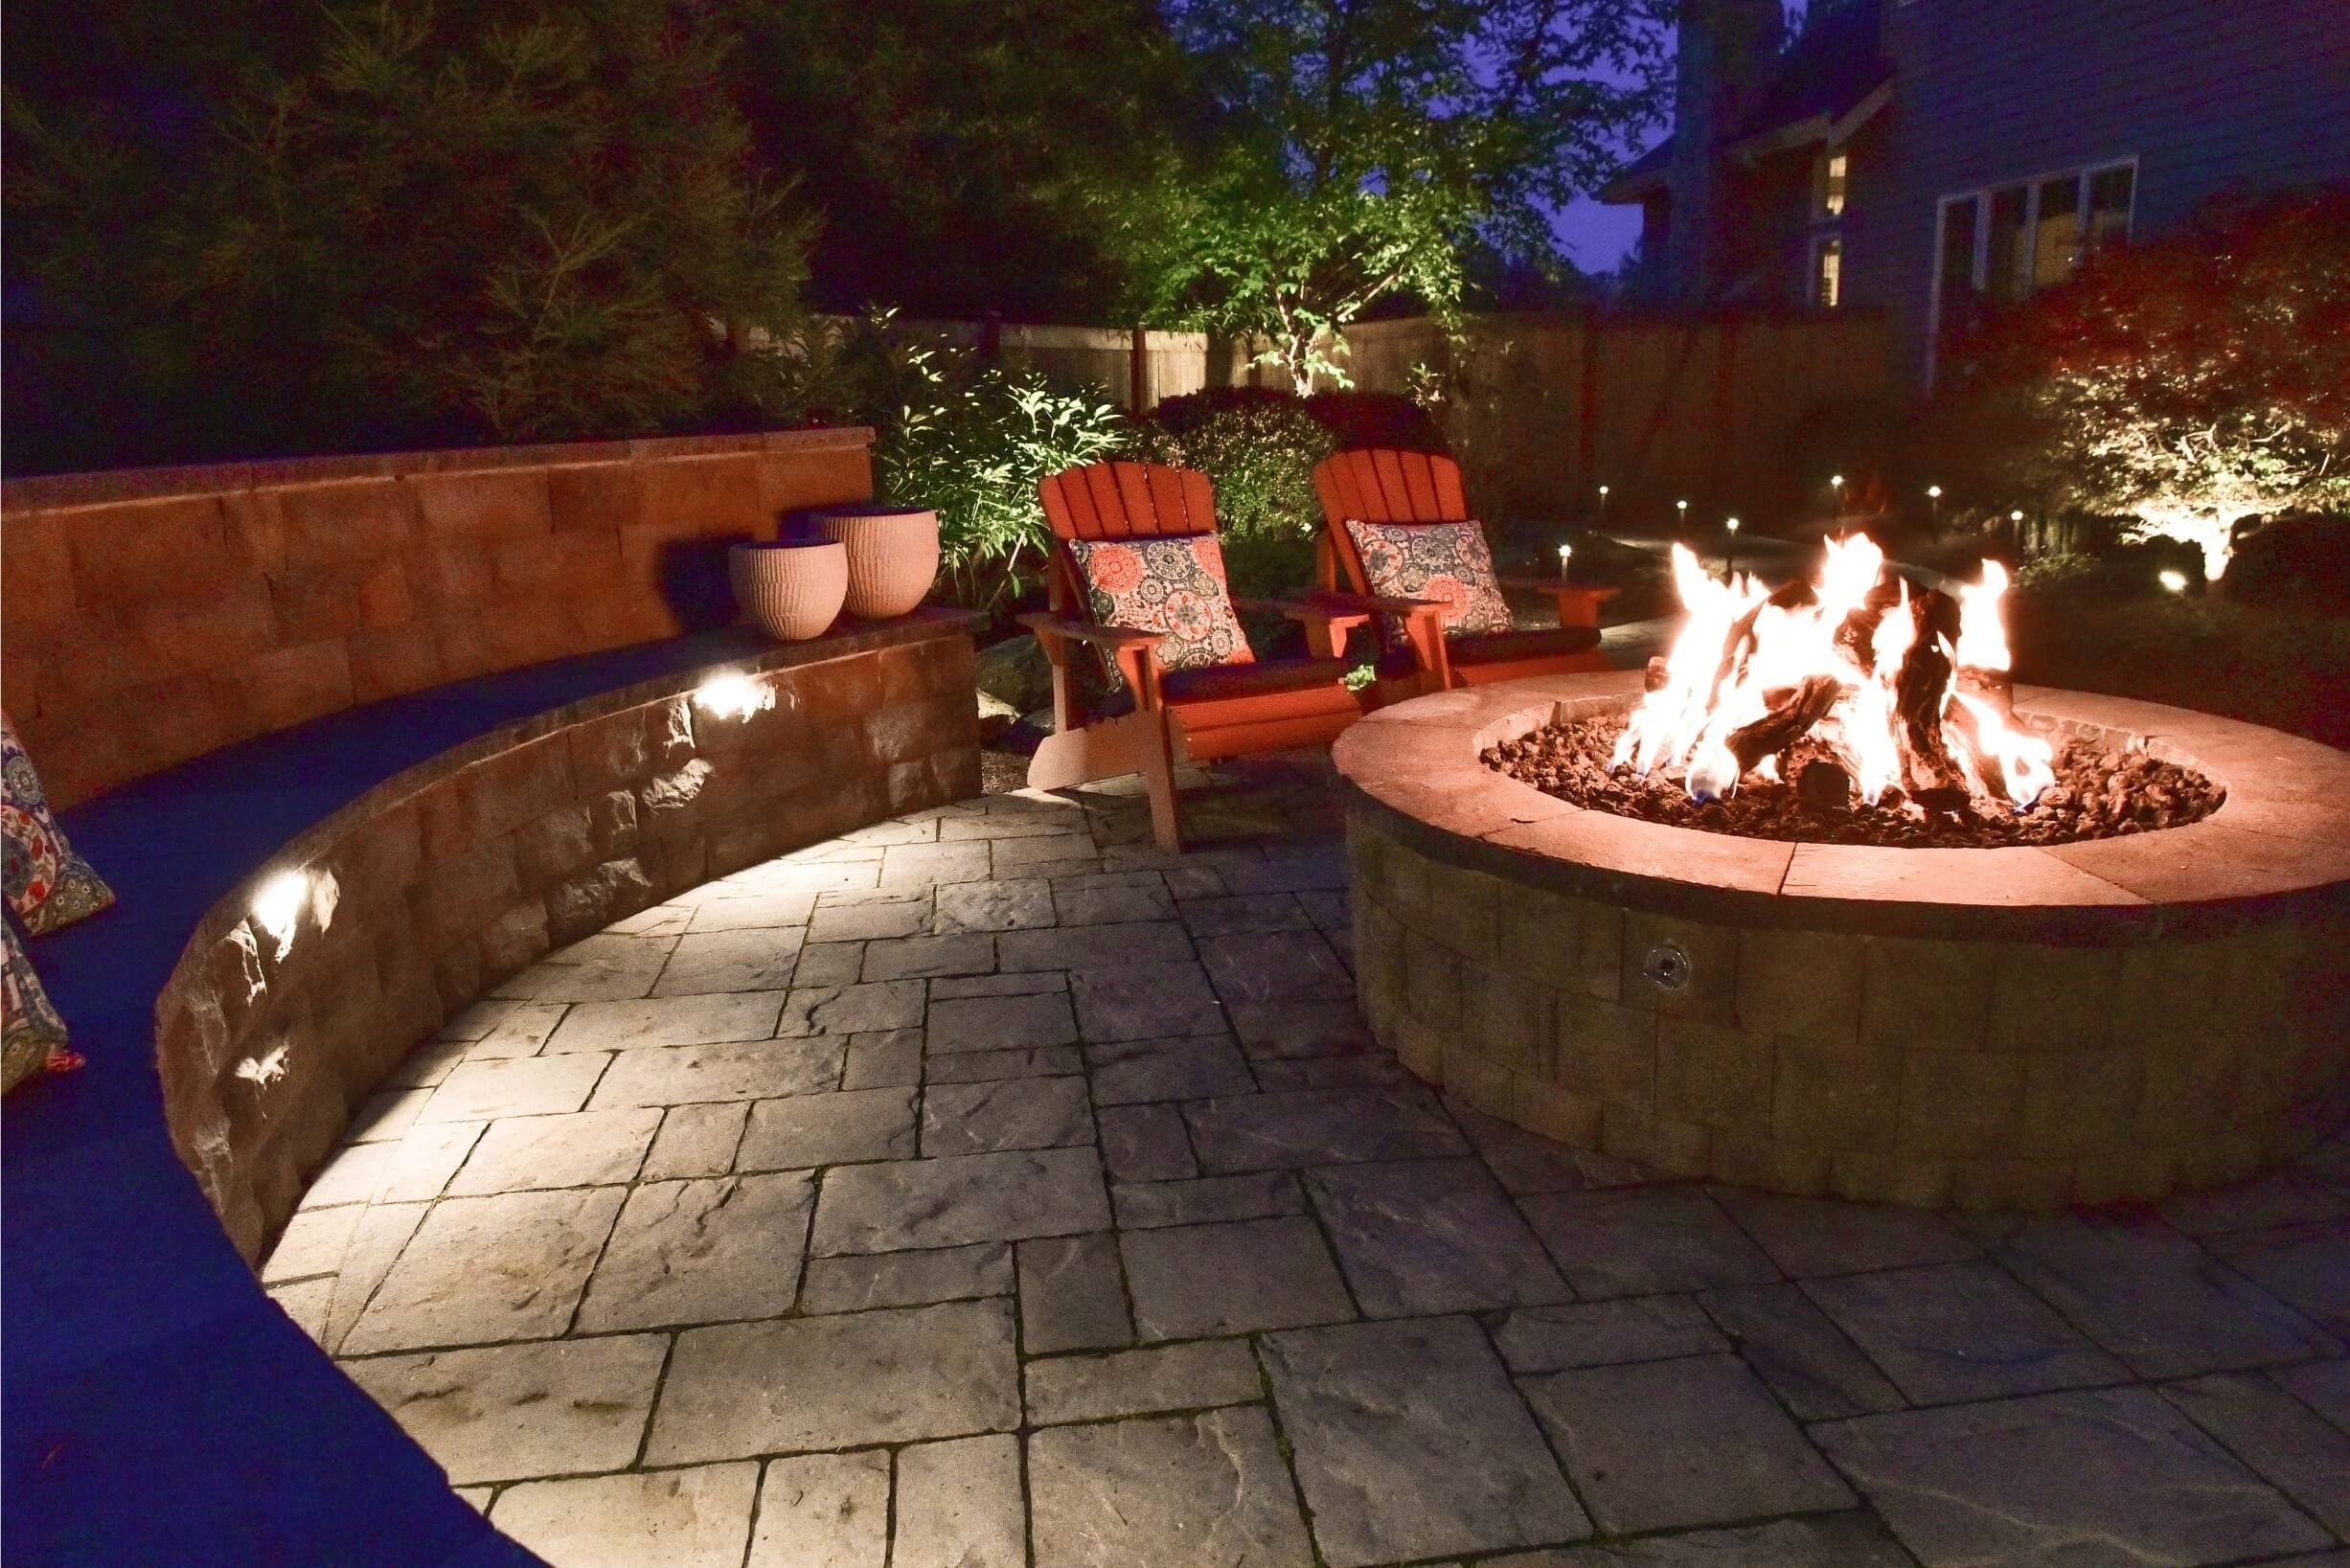 Imagine Relaxing by a Fire Pit on Your New Paver Patio in the Kirkland, WA,  Area